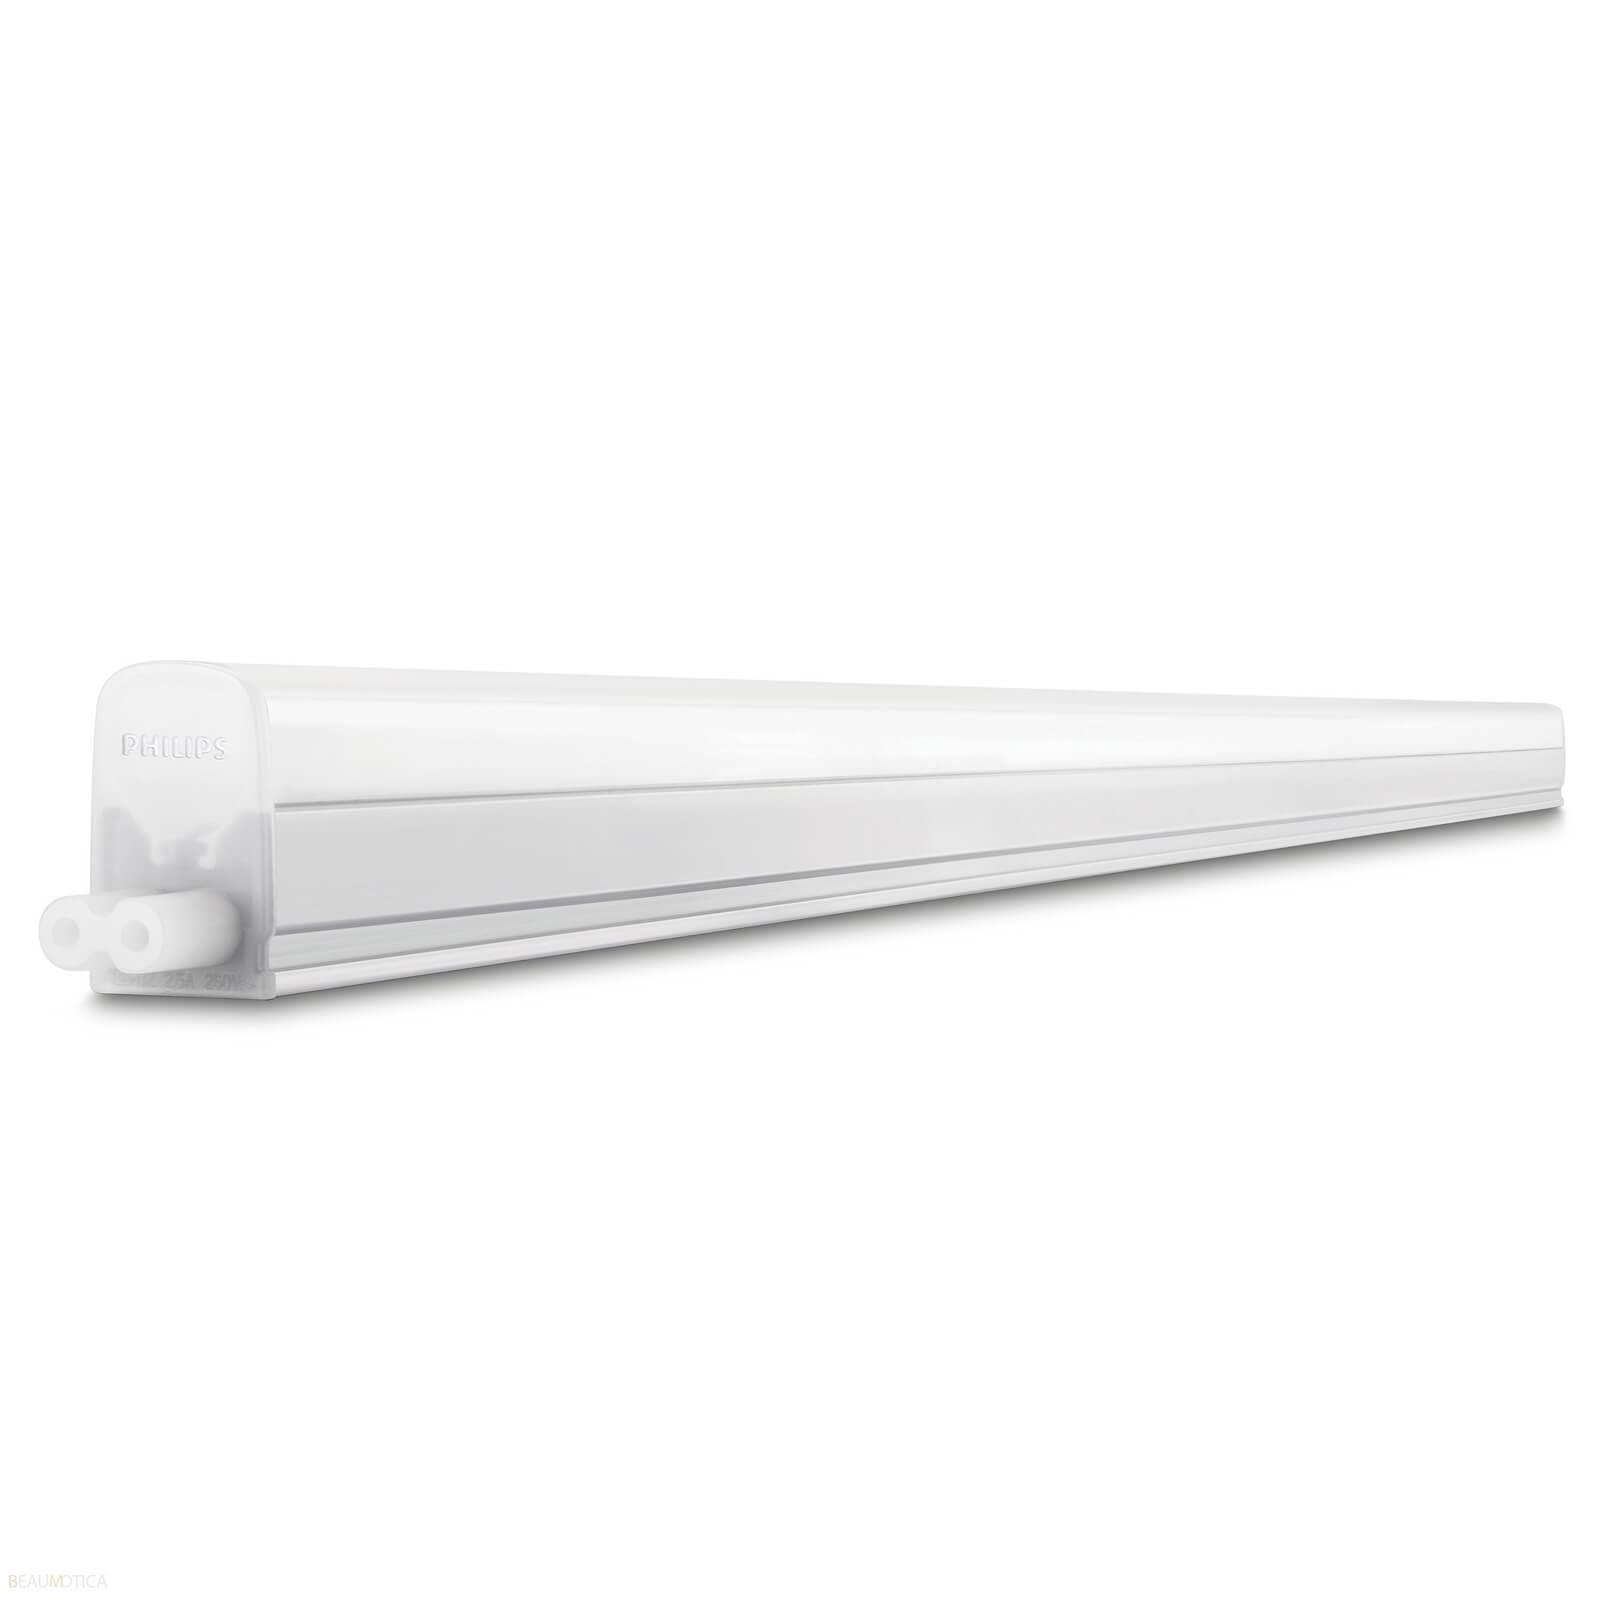 Selected image for PHILIPS Zidna lampa Shellline 3000K 20W